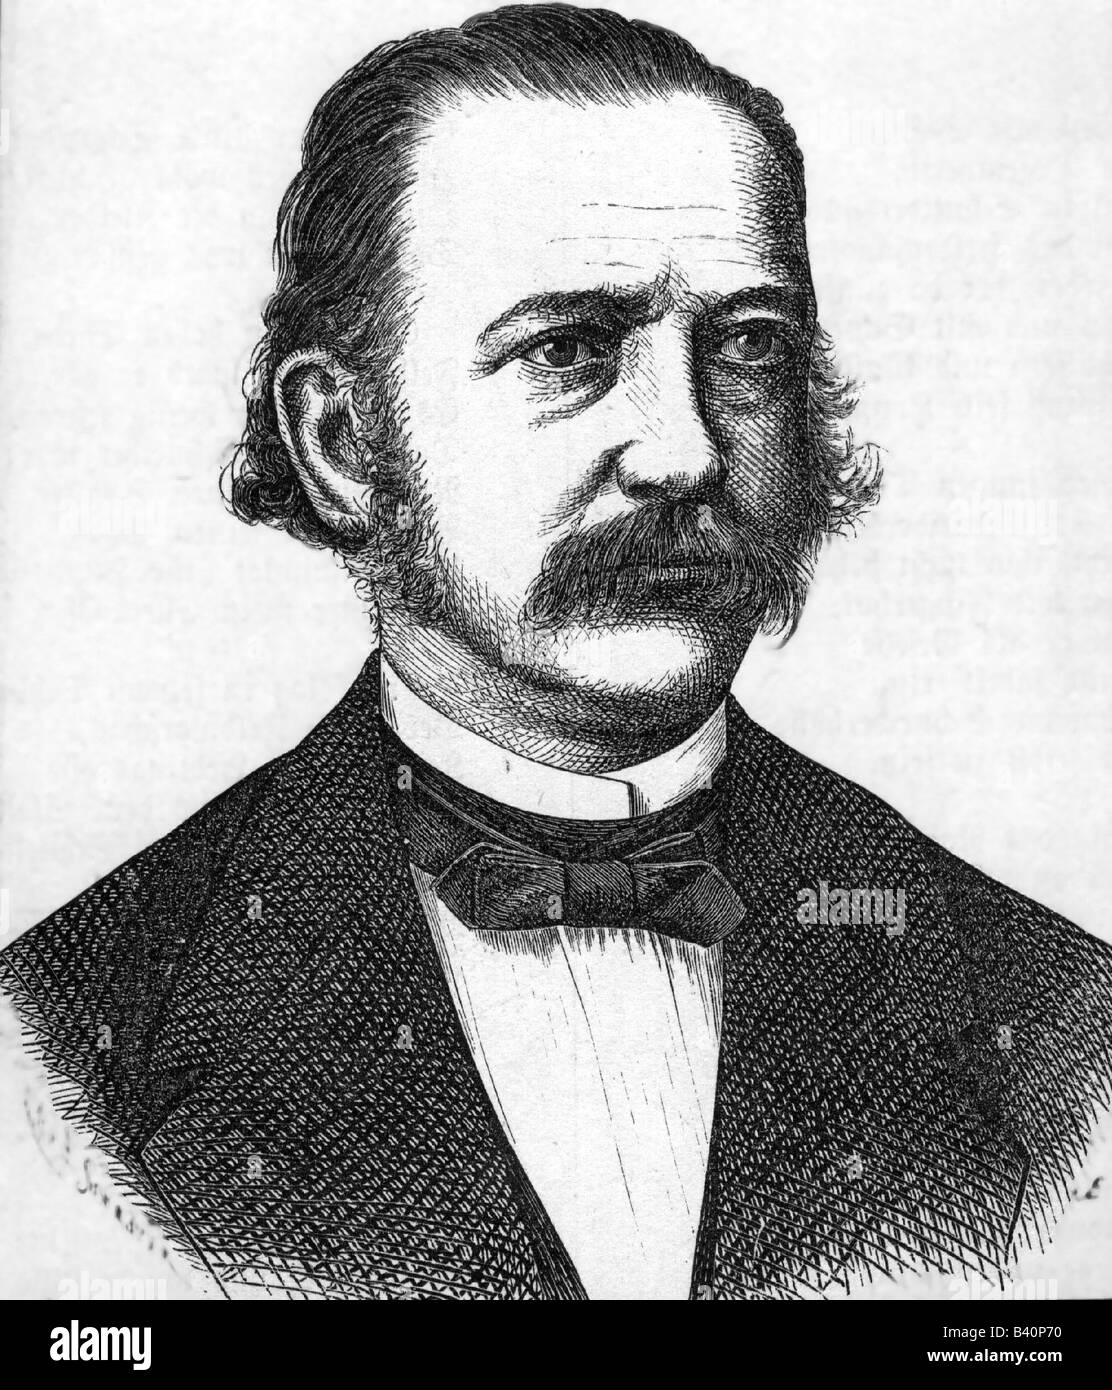 Fontane, Theodor, 30.12.1819 - 20.9.1898, German author / writer, poet, portrait,  contemporary engraving by E. Schröter, 19th century, , Stock Photo